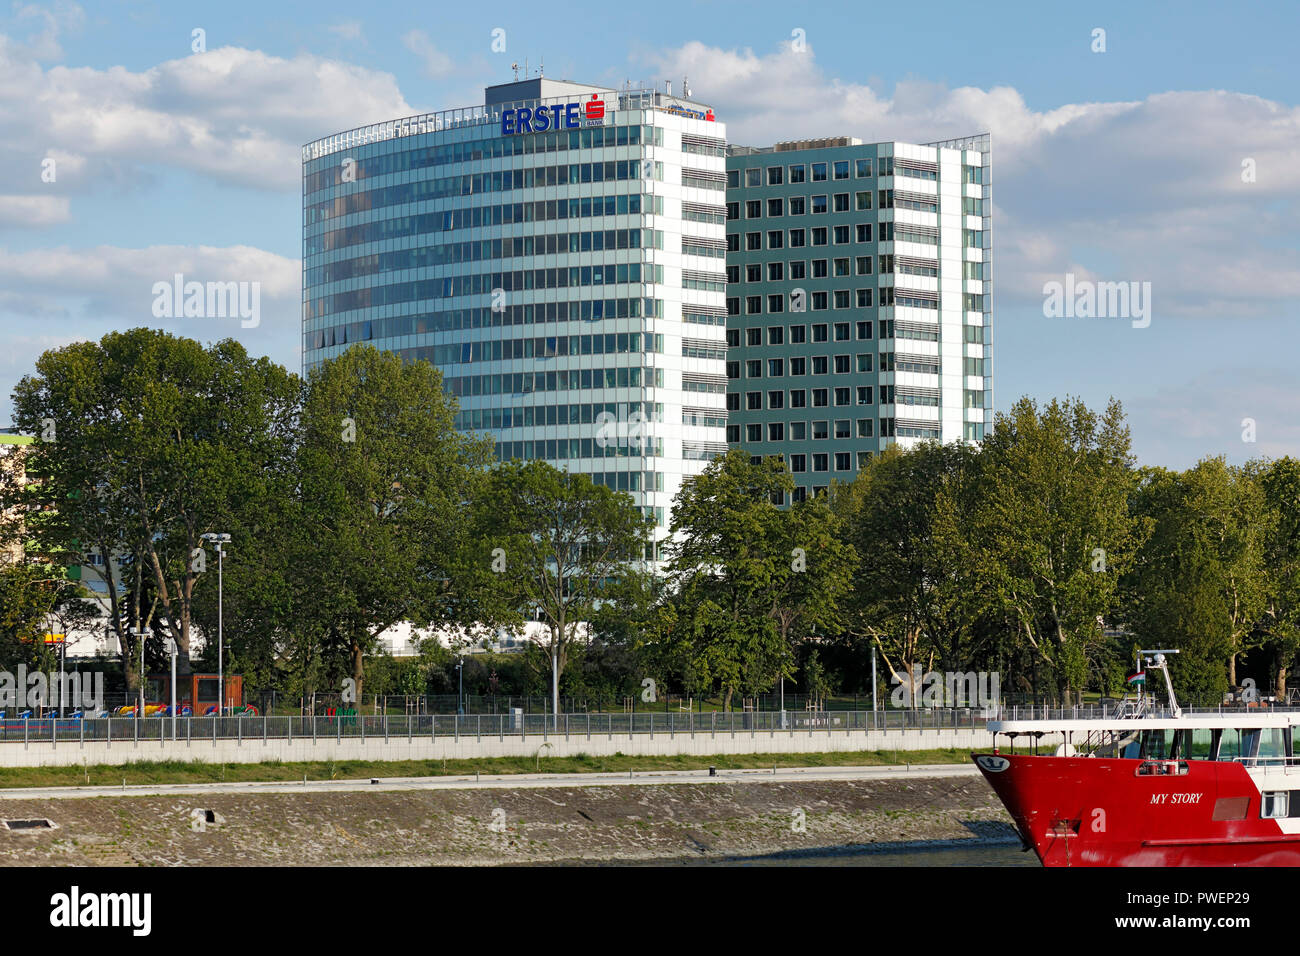 Hungary, Central Hungary, Budapest, Danube, Capital City, bank building, highrise, Erste Bank ATM, Erste Bank Hungary, Sparkasse Austria, Erste Bank Austria, Erste Group Bank AG, economy, trade, UNESCO World Heritage Site Stock Photo